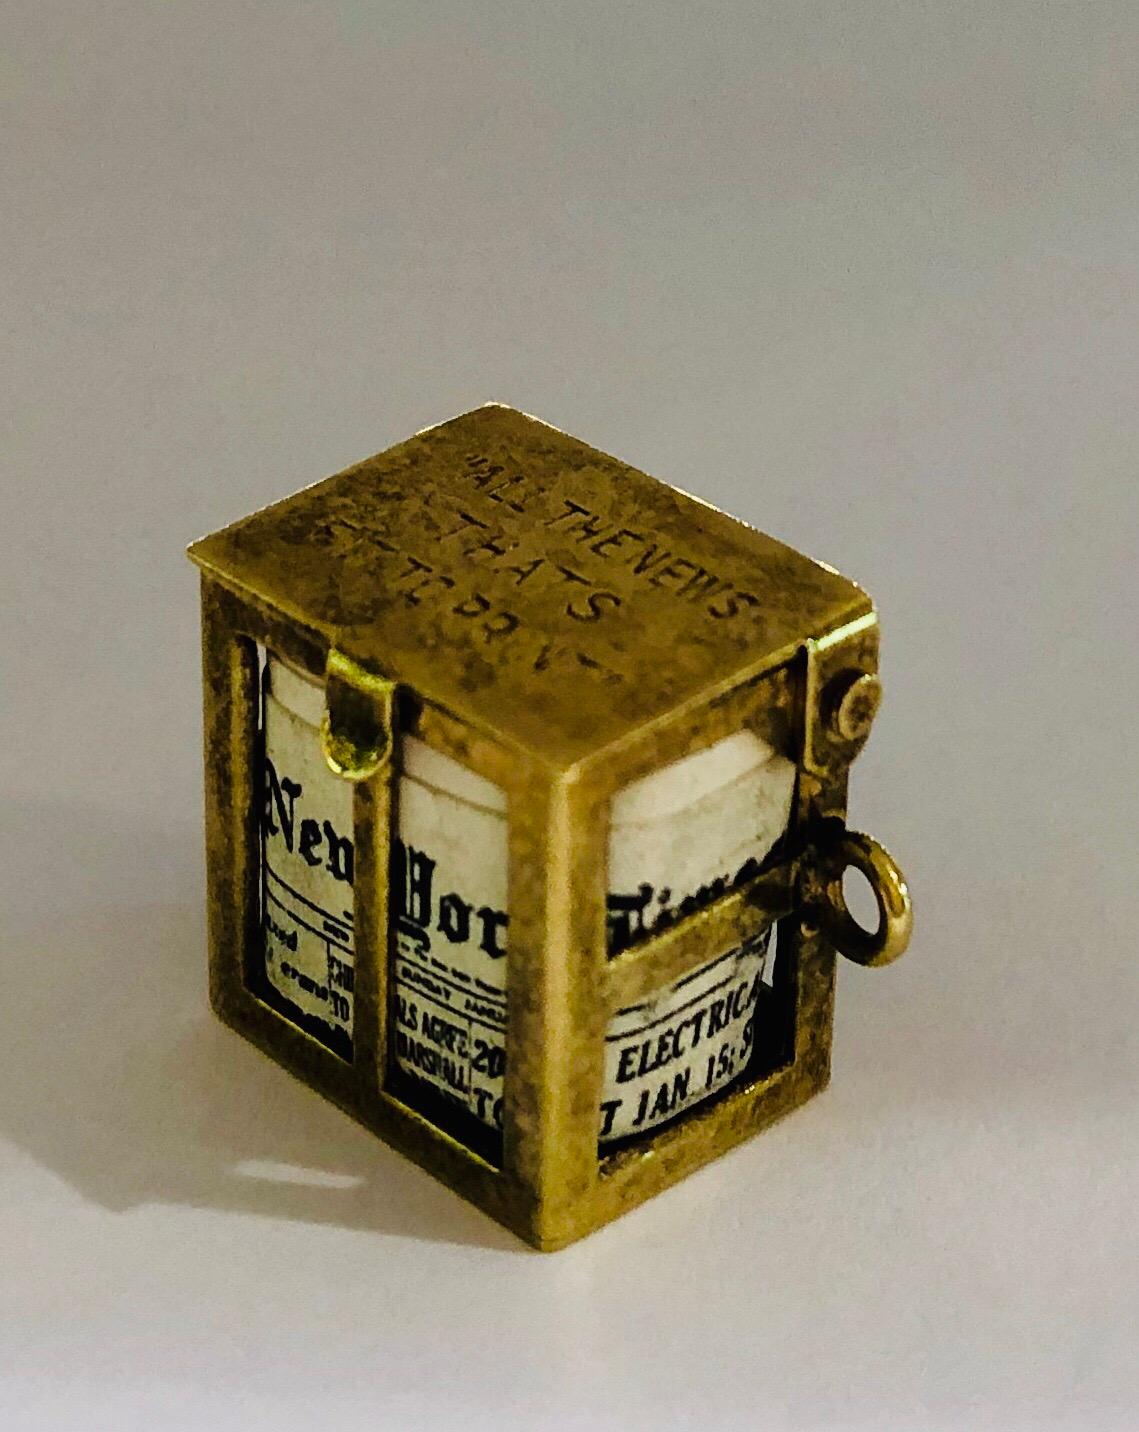 New York Times Rare Gold Charm/Pendant “All The News Thats Fit To Print” For Sale 5